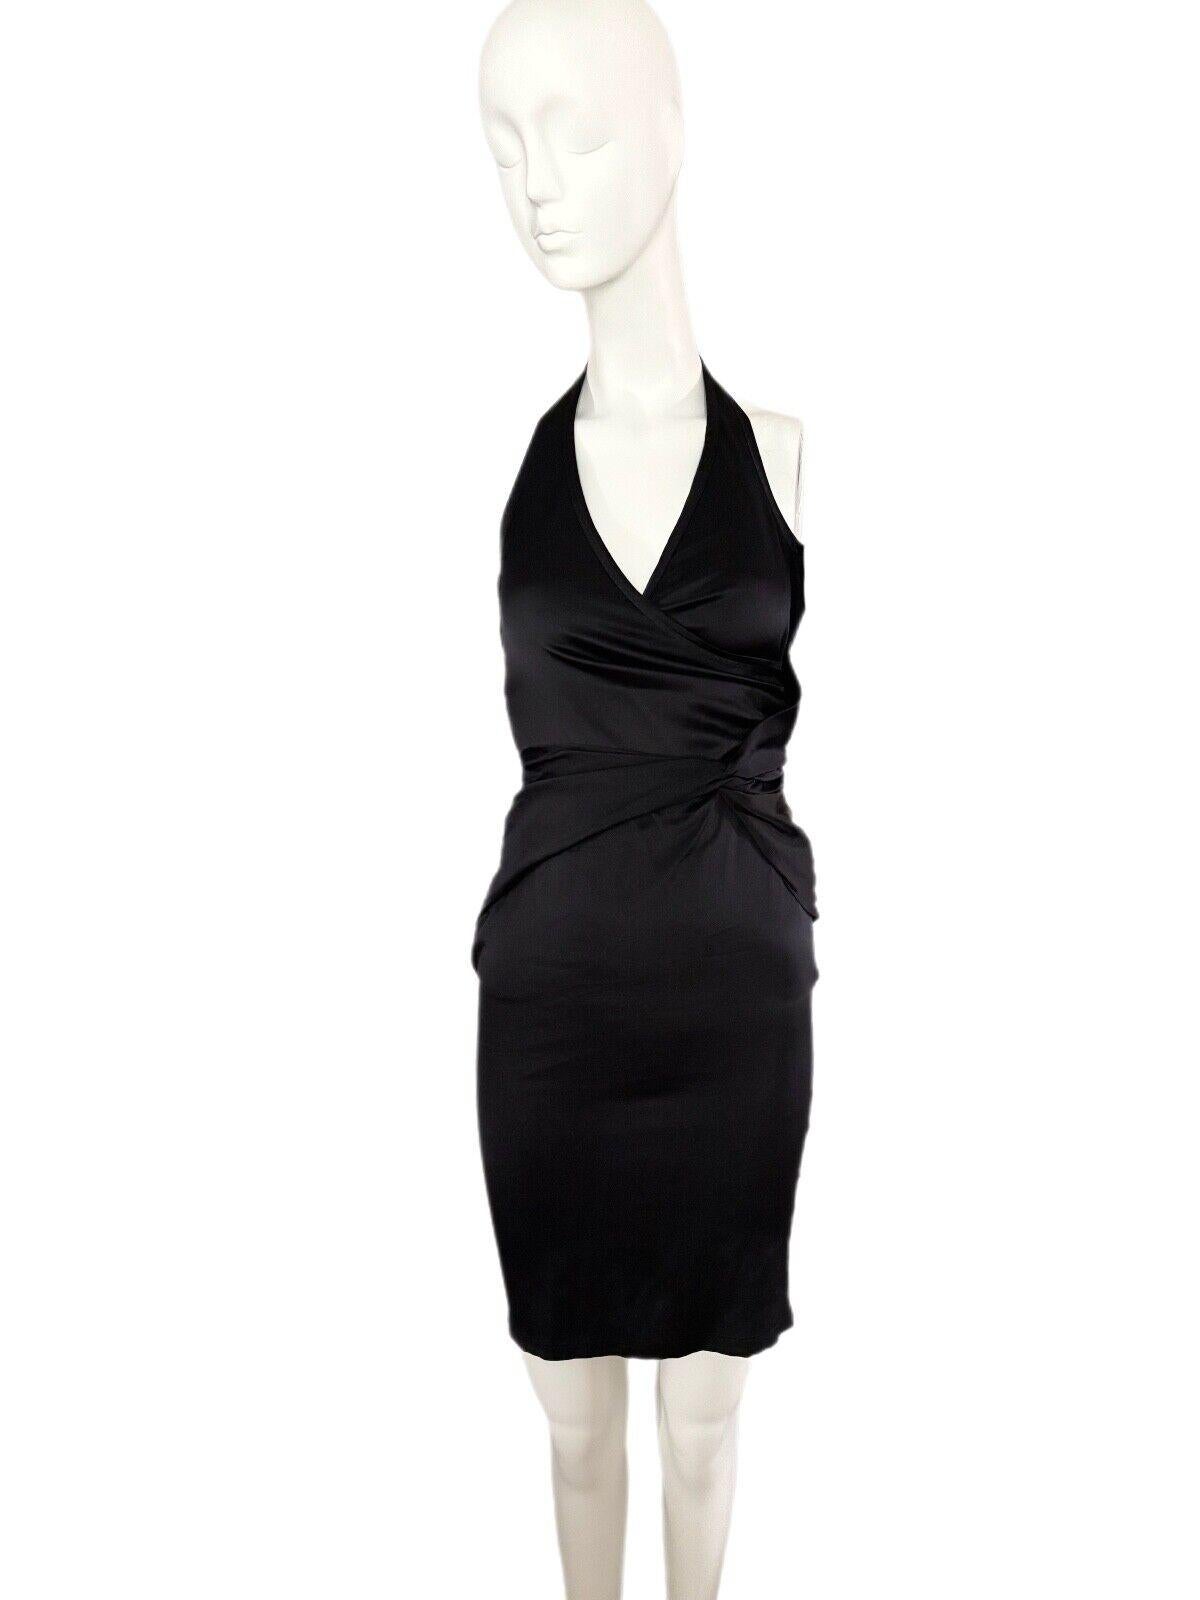 GUCCI by TOM FORD Vintage 2004/2005 cut out halter dress 2